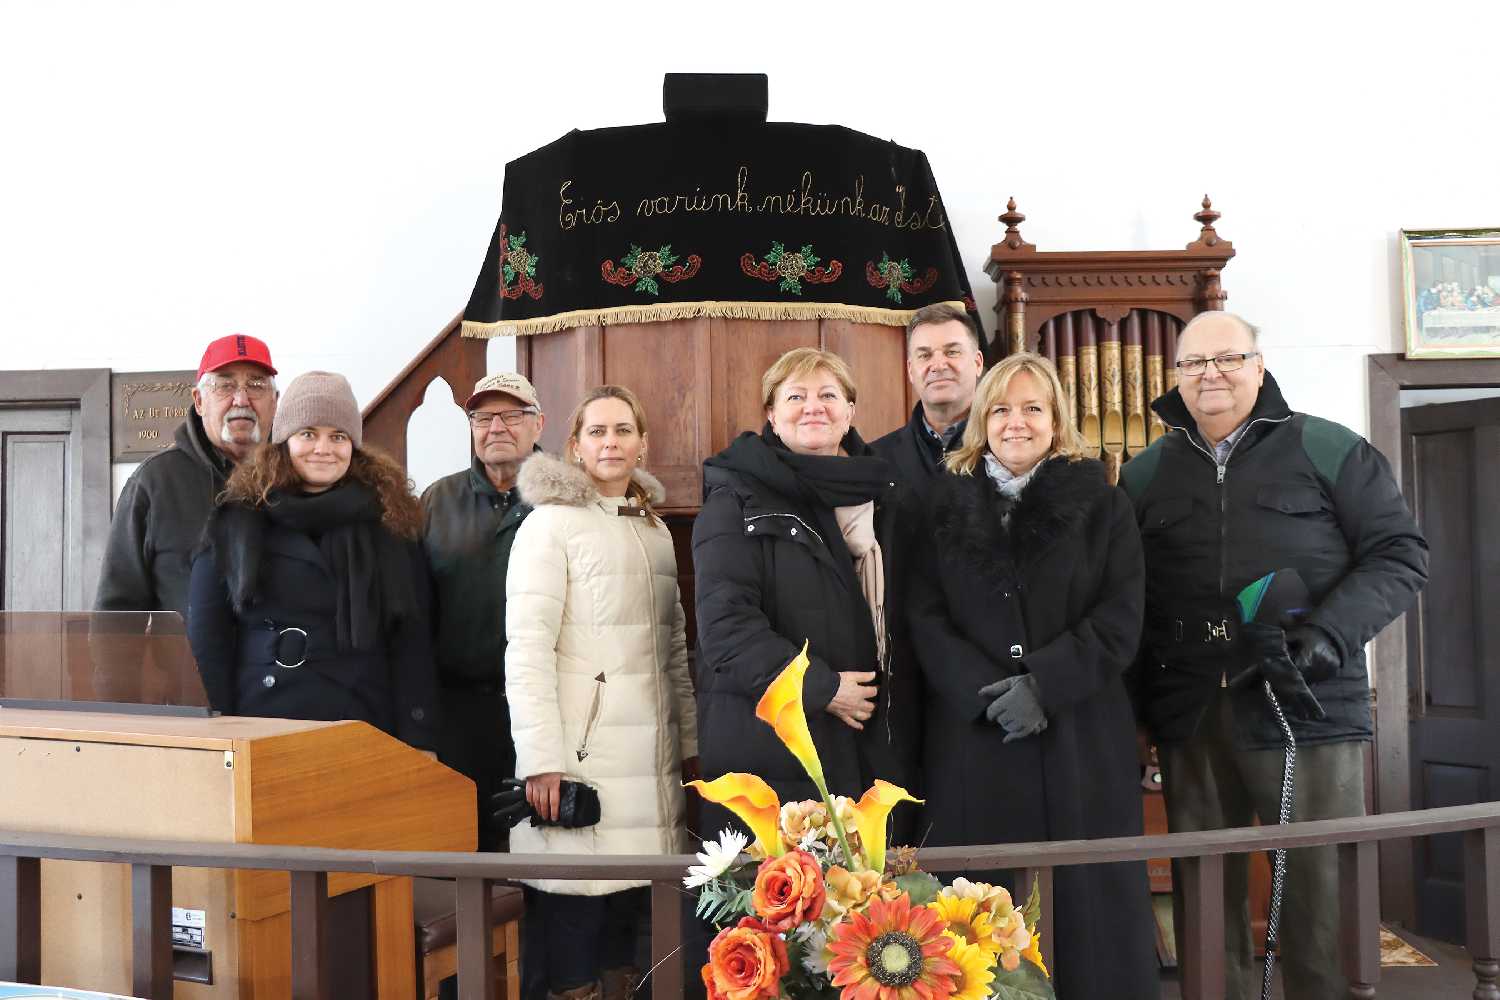 Katalin Szili and Maria Vass-Salazar at Bekevar church in Kipling along with Candace and Steven Bonk and members of the Bekevar Heritage Society.